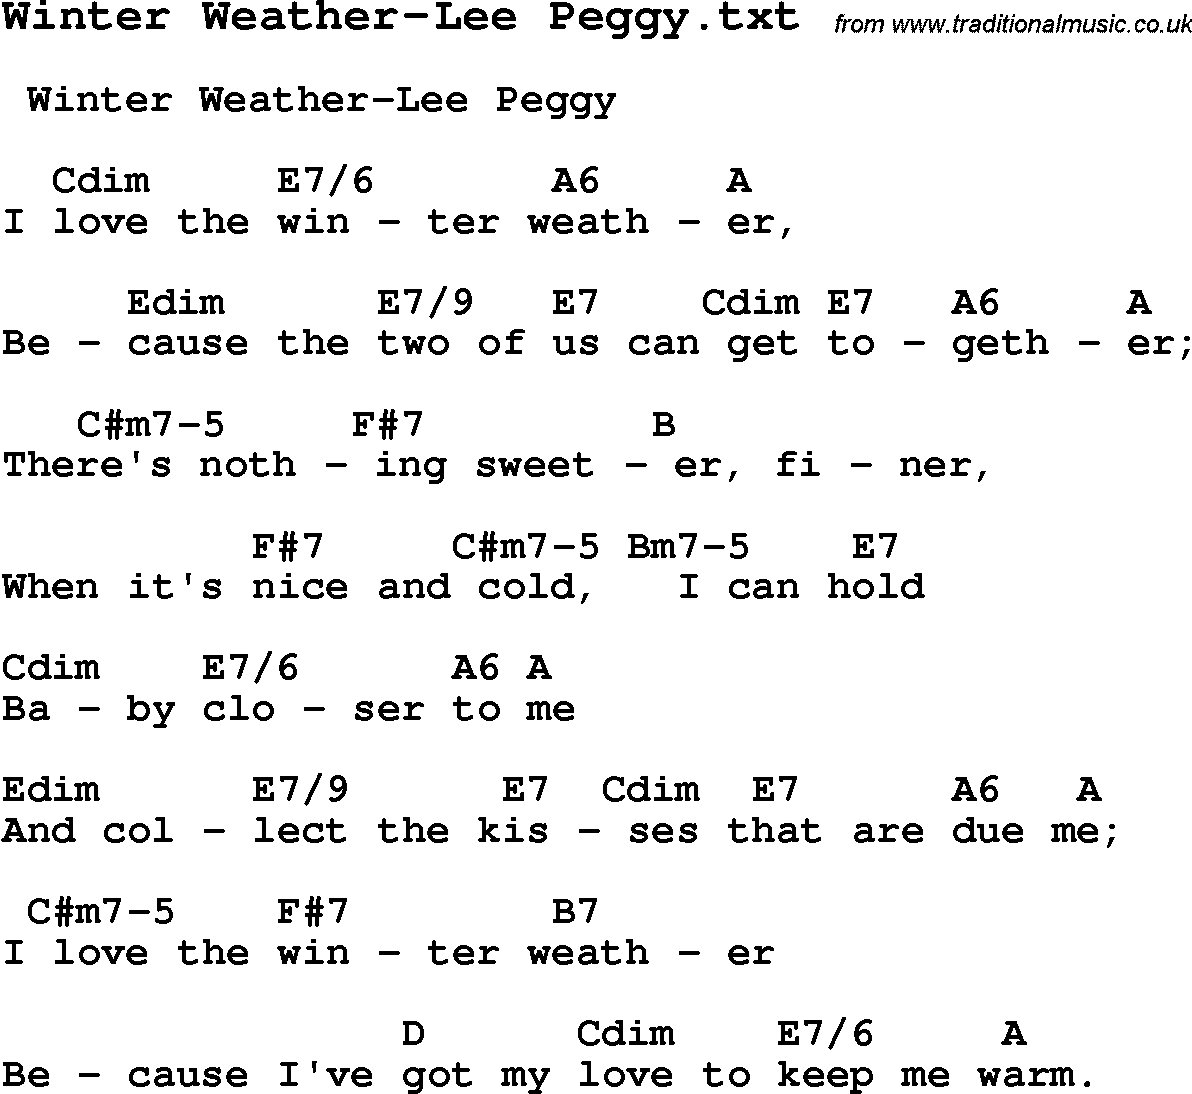 Jazz Song from top bands and vocal artists with chords, tabs and lyrics - Winter Weather-Lee Peggy